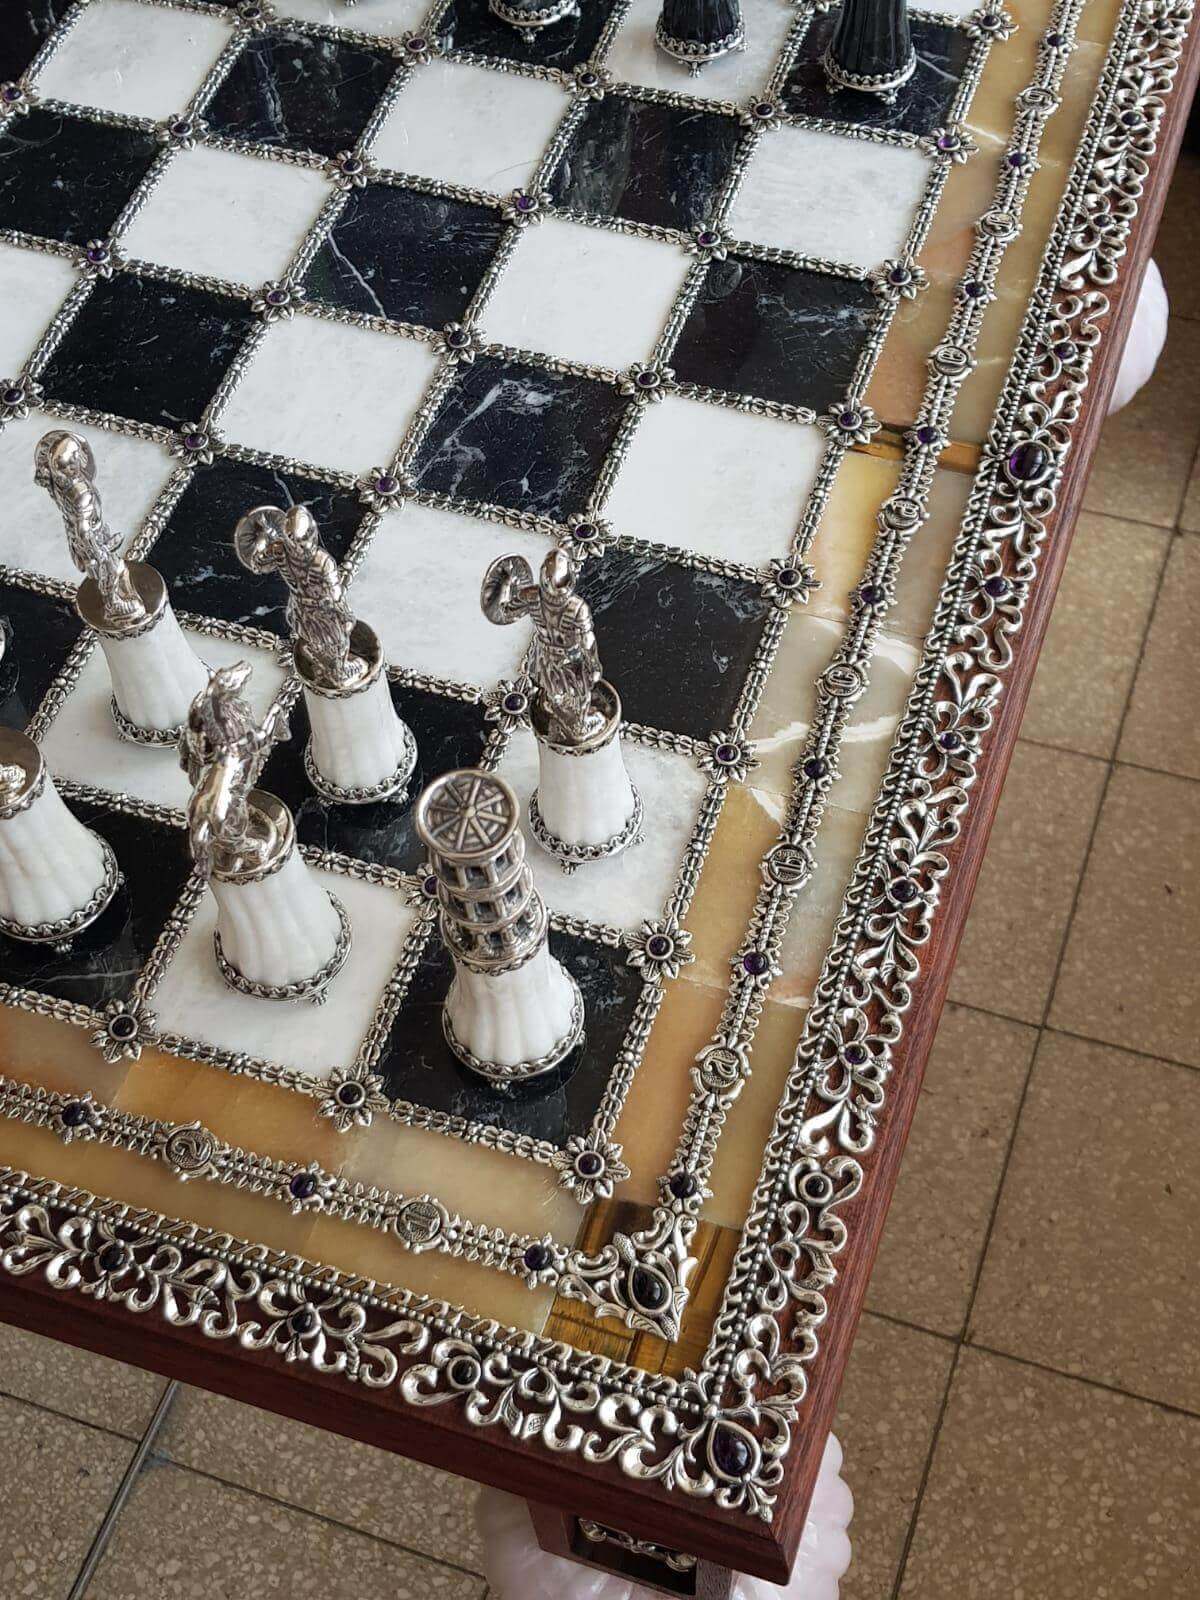 Black and White Oynx Chess Set A - Piece By Zion Hadad